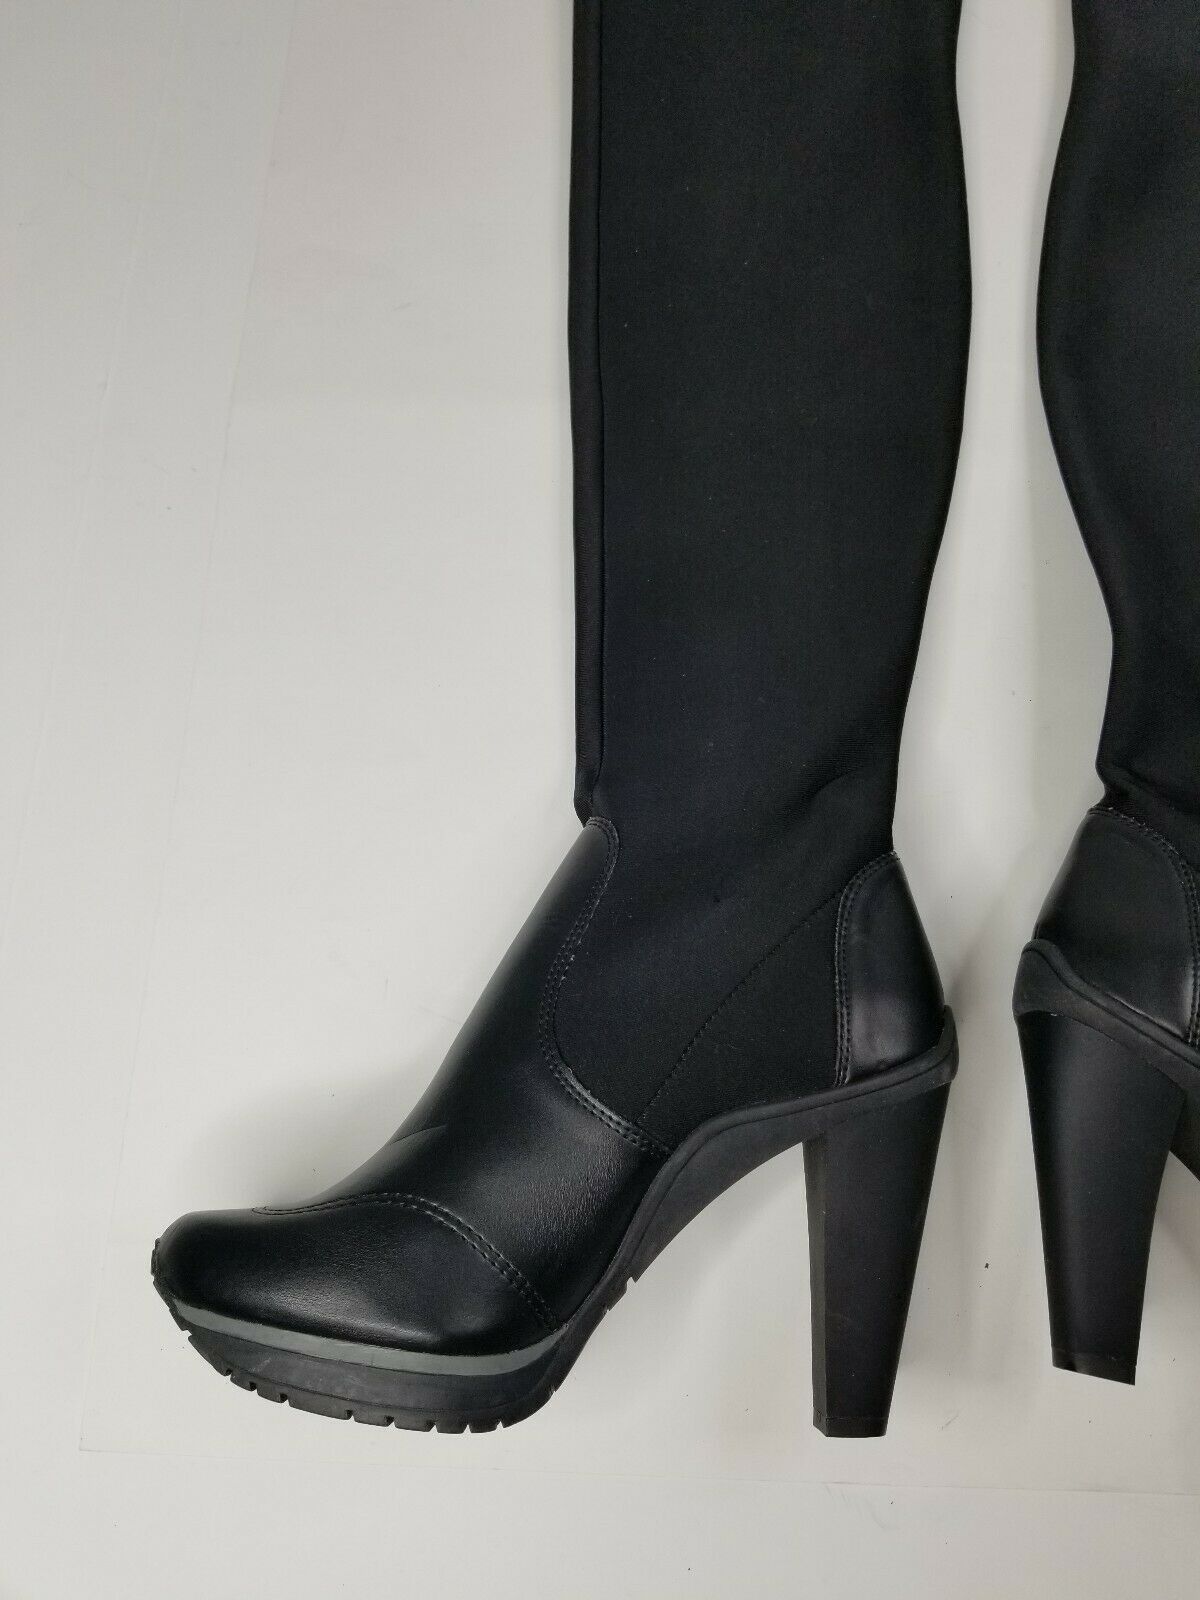 DKNY DKNY Browning Womens Black Neoprene Over-The-Knee Boots Size US 10 / EU 43 - 6 Thumbnail